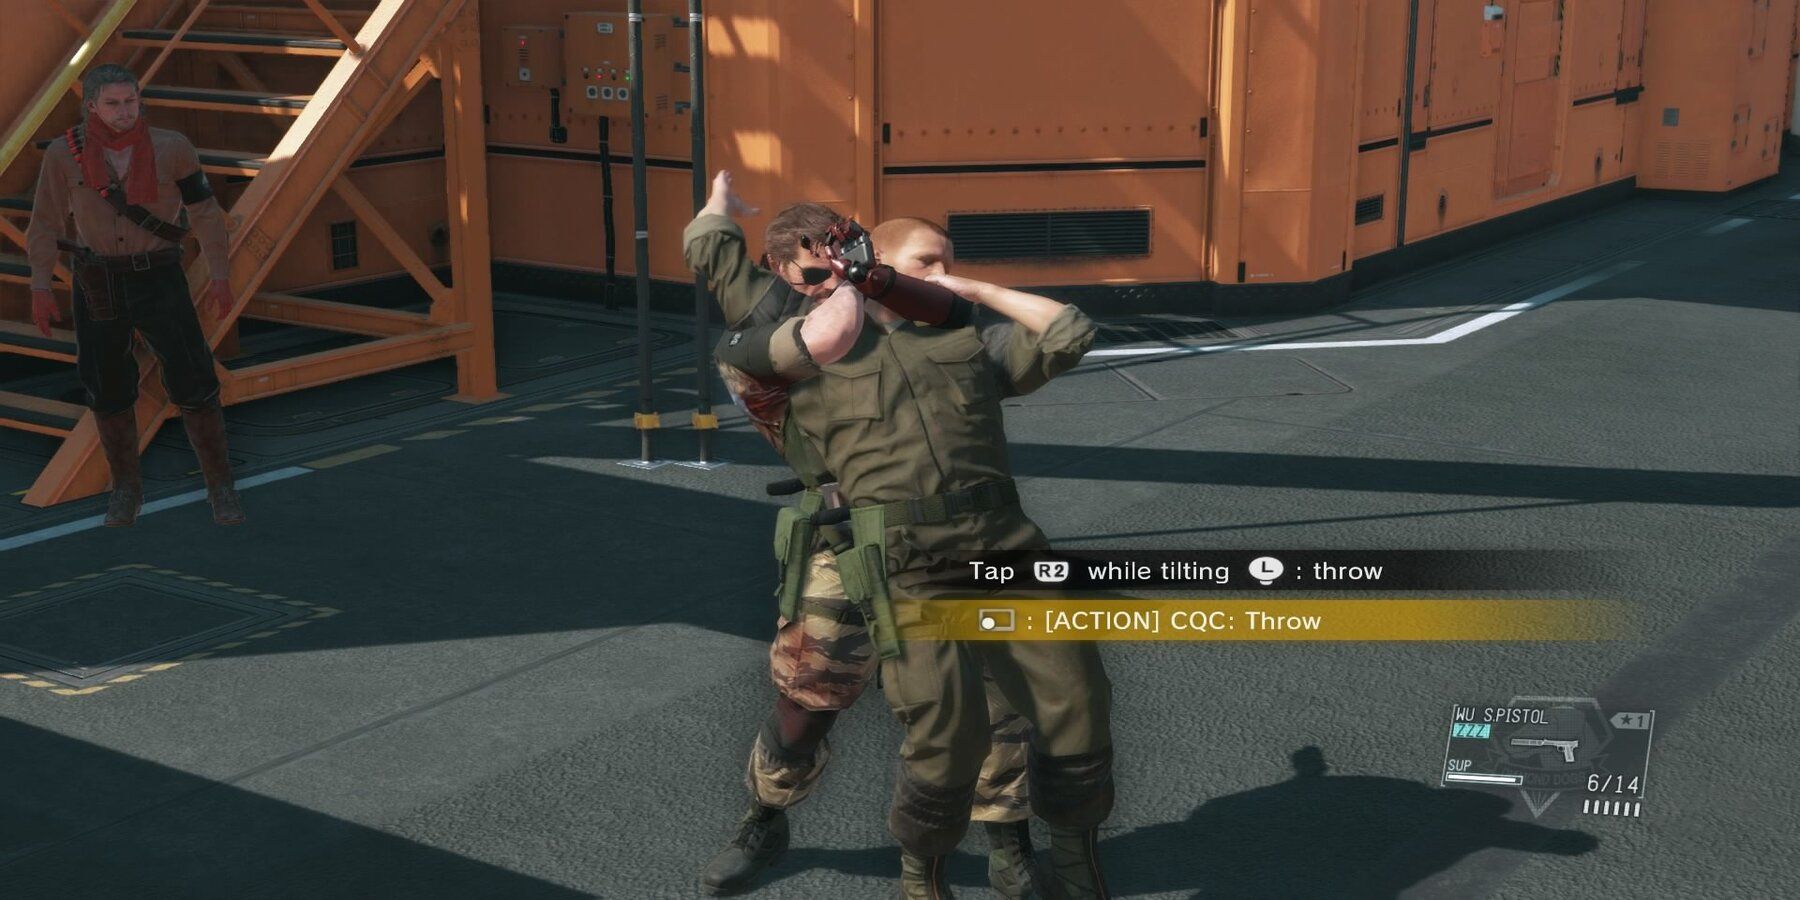 Snake Using CQC on a soldier in Metal Gear Solid 5